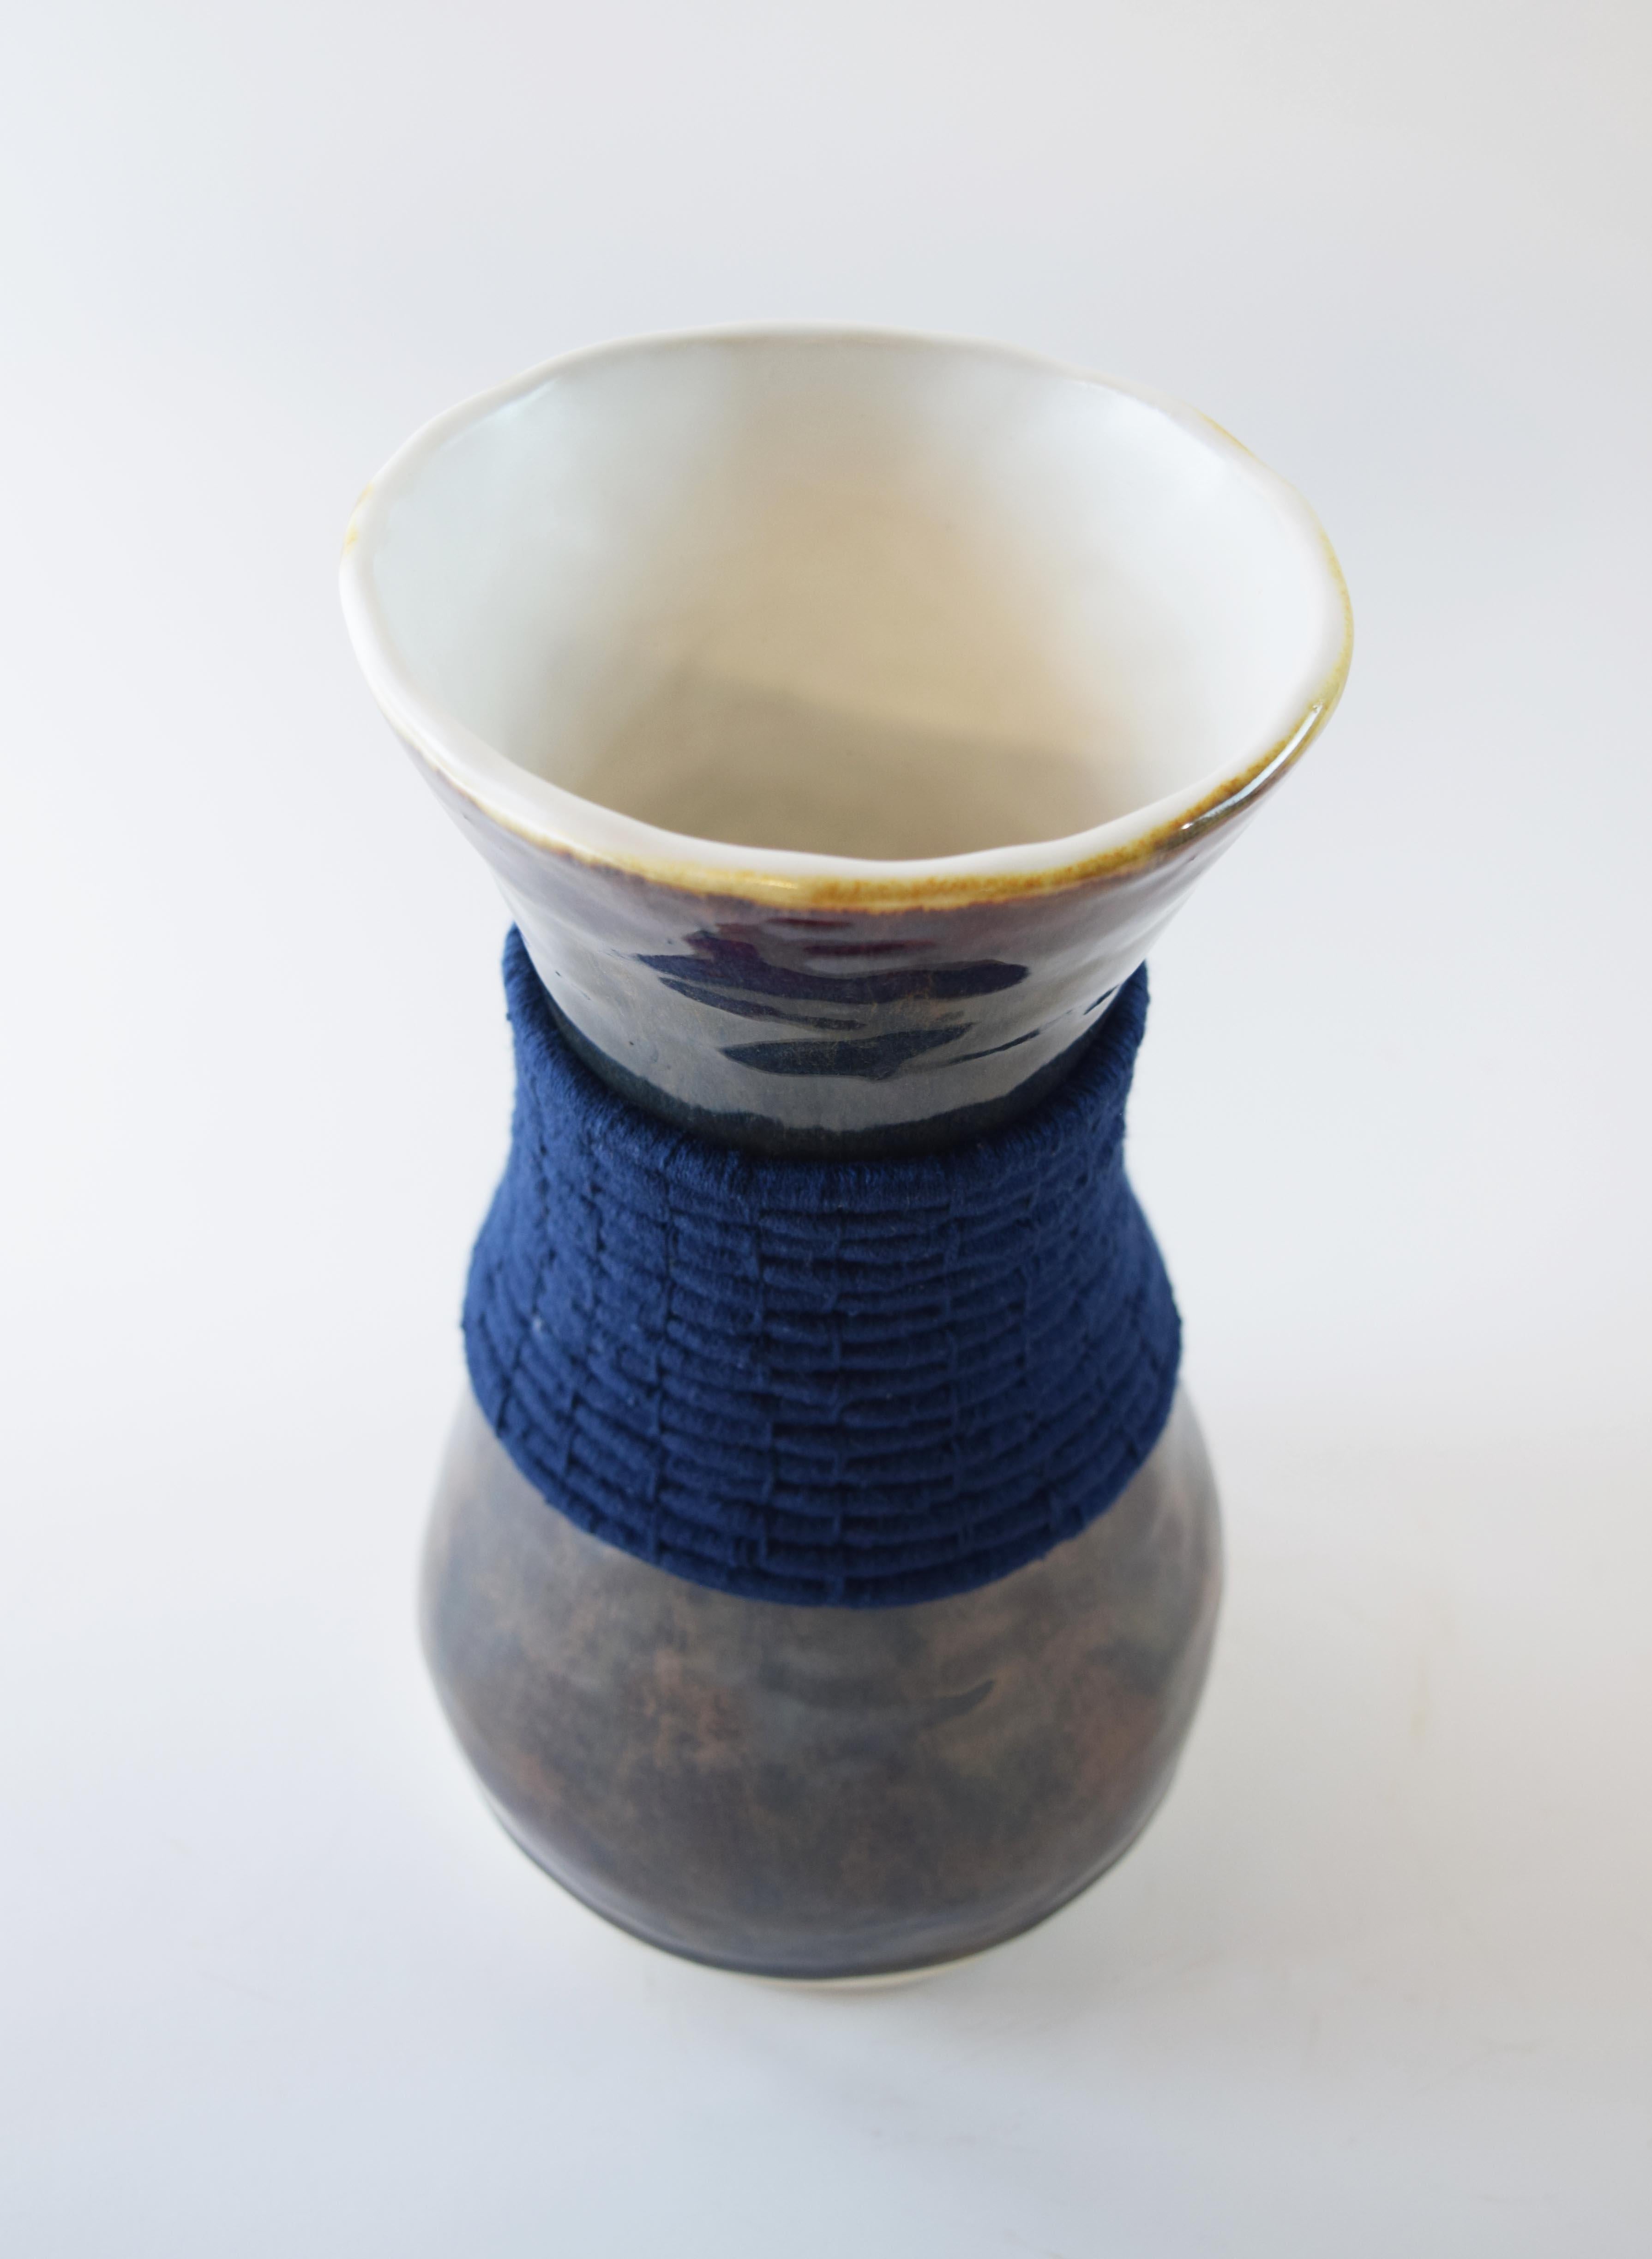 Vase #768 by Karen Gayle Tinney

Hand formed stoneware vase with a multi-colored glaze that appears in tones ranging from red to brown to blue. Woven navy cotton detailing around outside of vessel. Vase is water tight.

10”H x 5.5”W

One of a